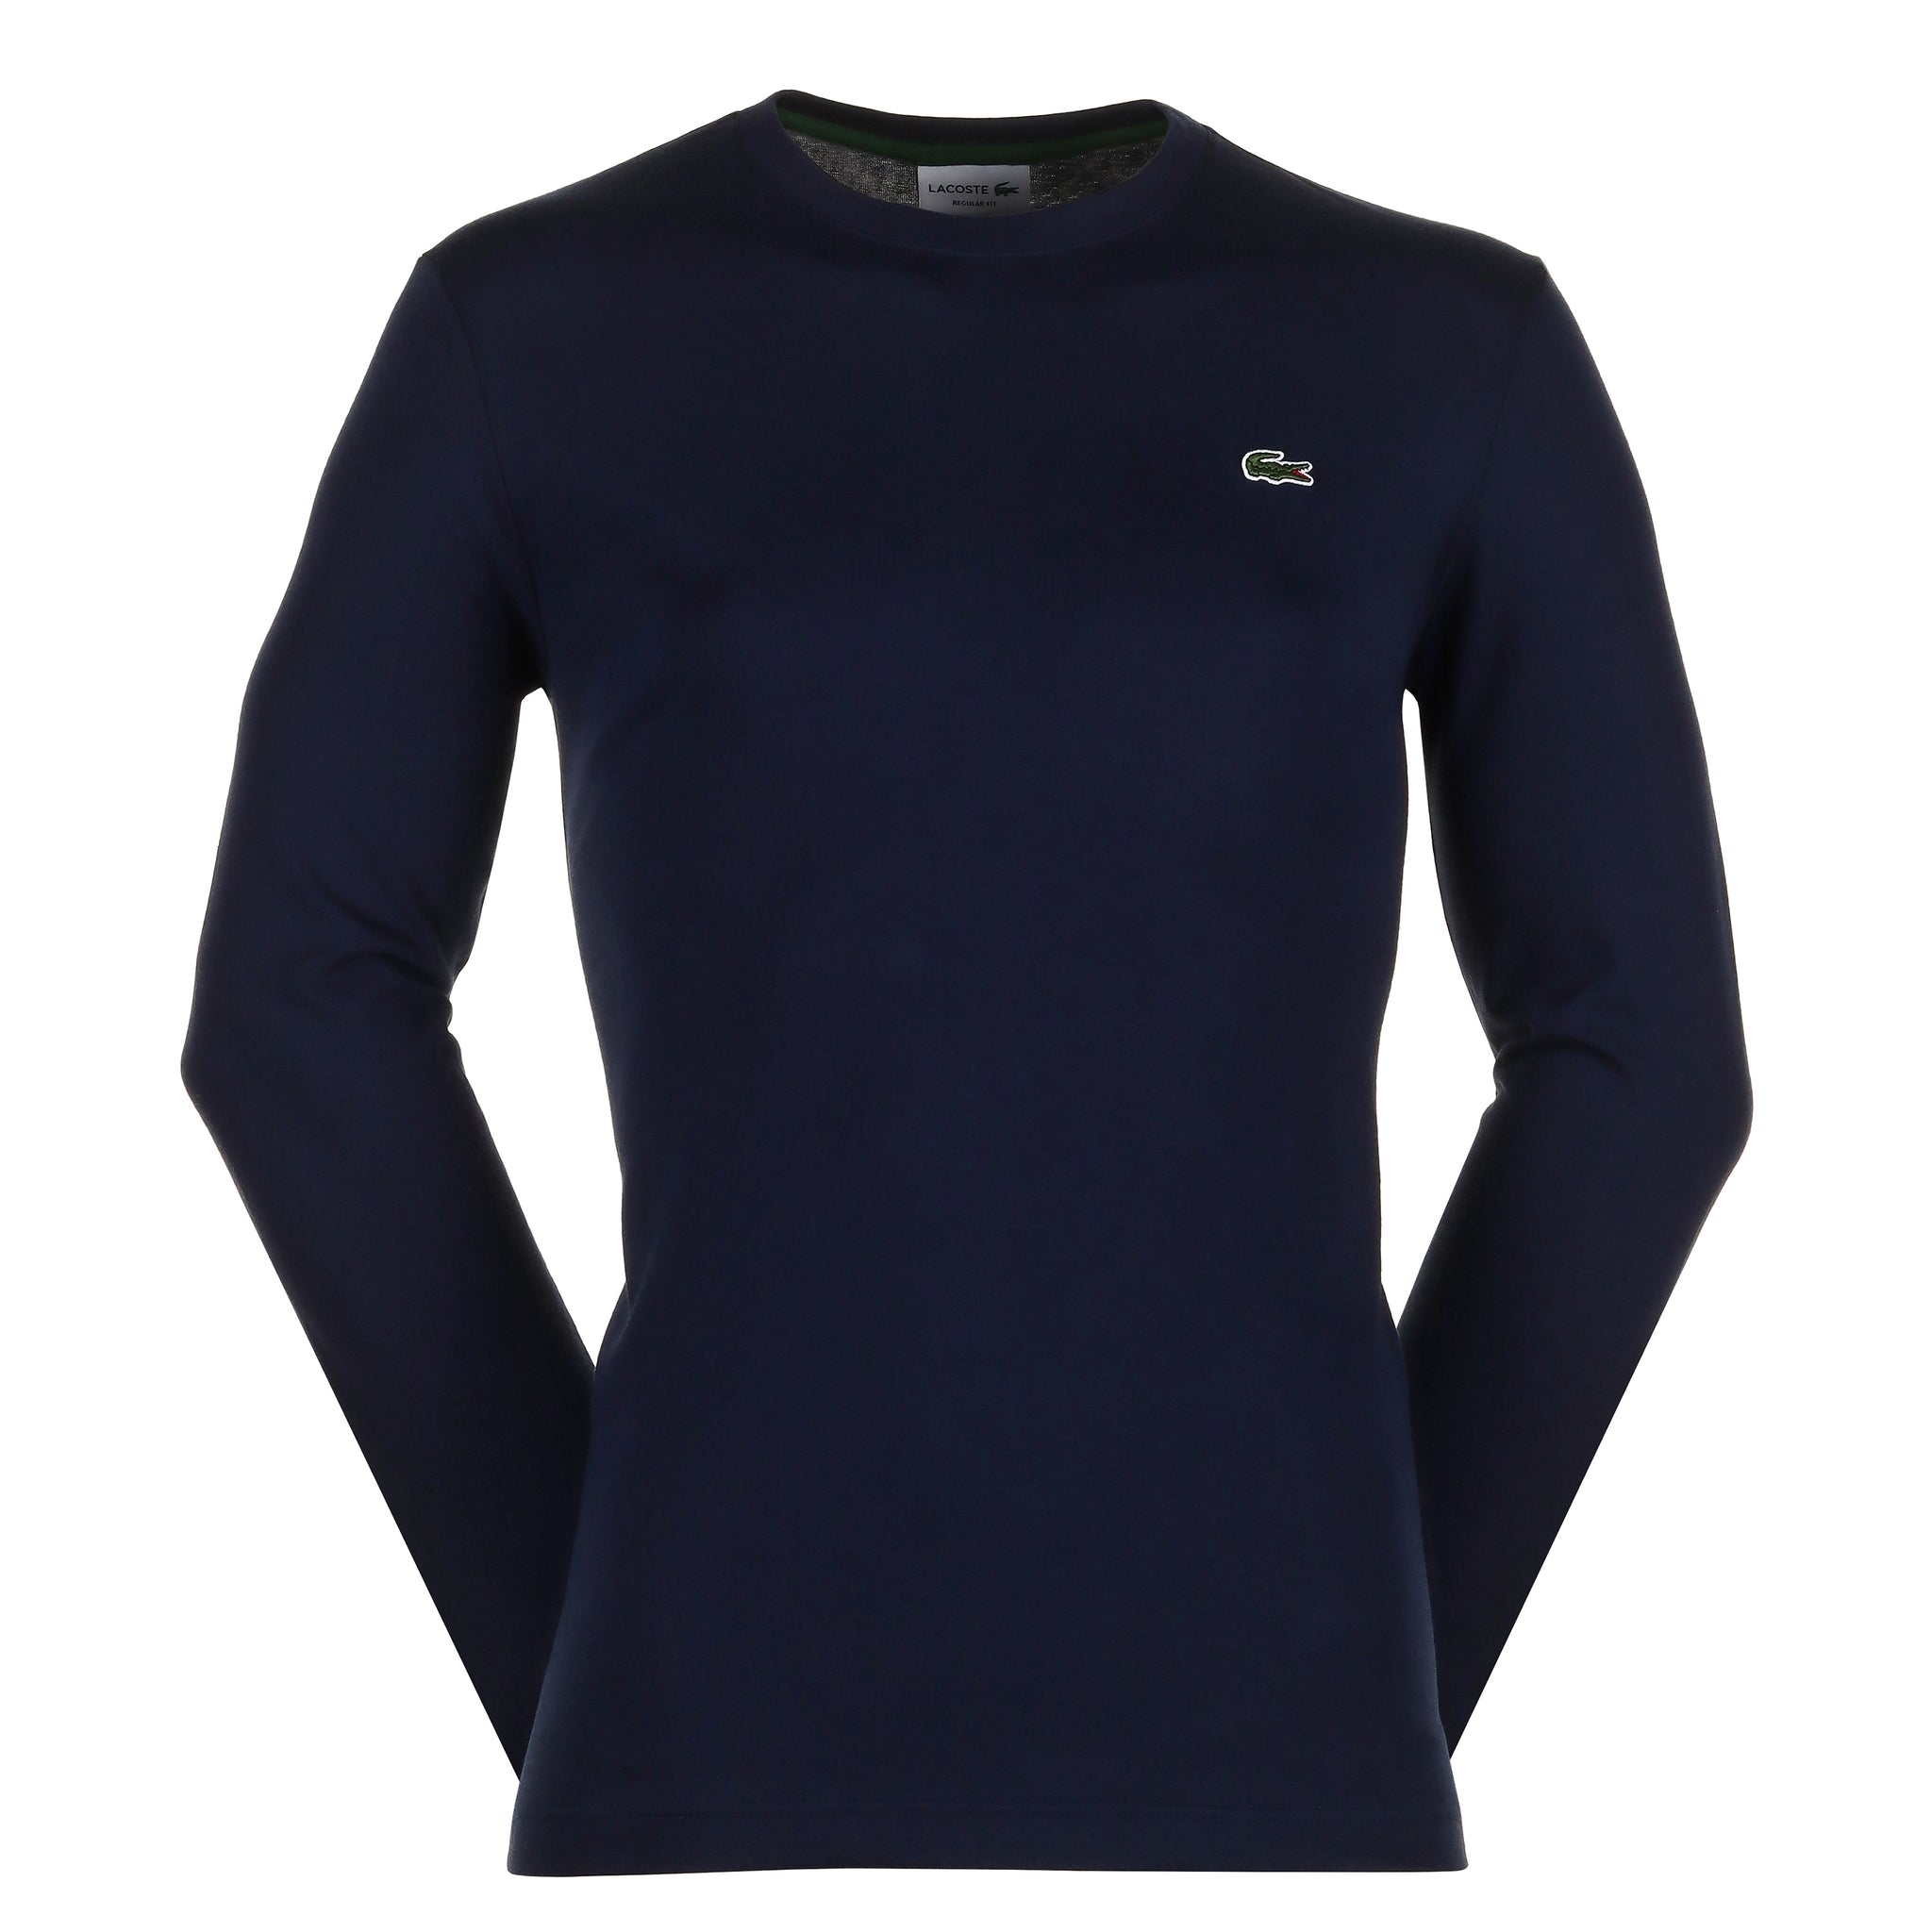 Lacoste Long Sleeve Tee Shirt TH3662 Navy 166 | Function18